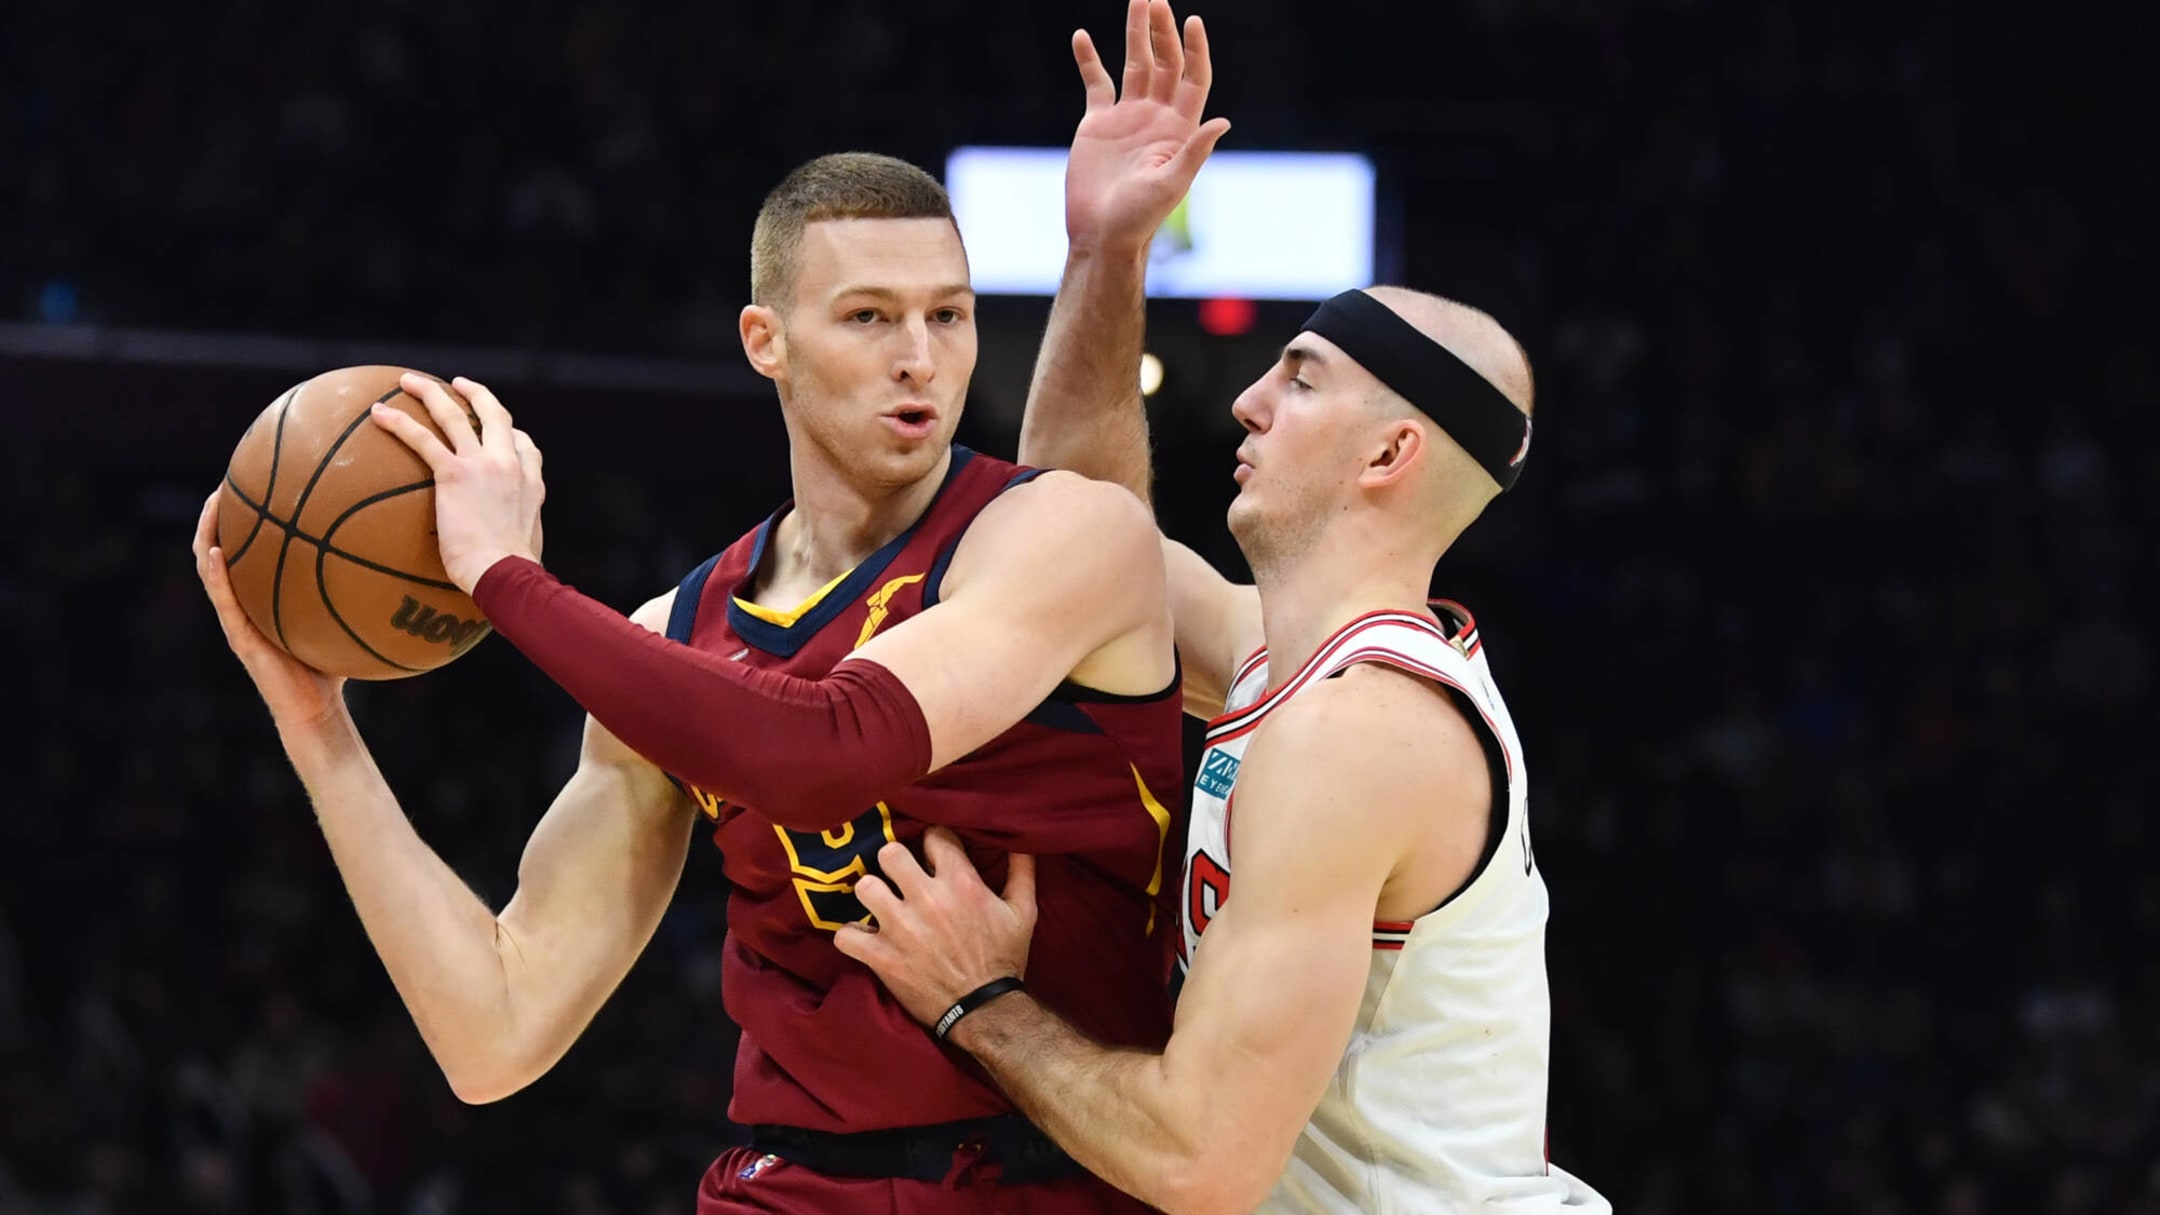 NBA Draft 2019: Dylan Windler is selected by Cavs